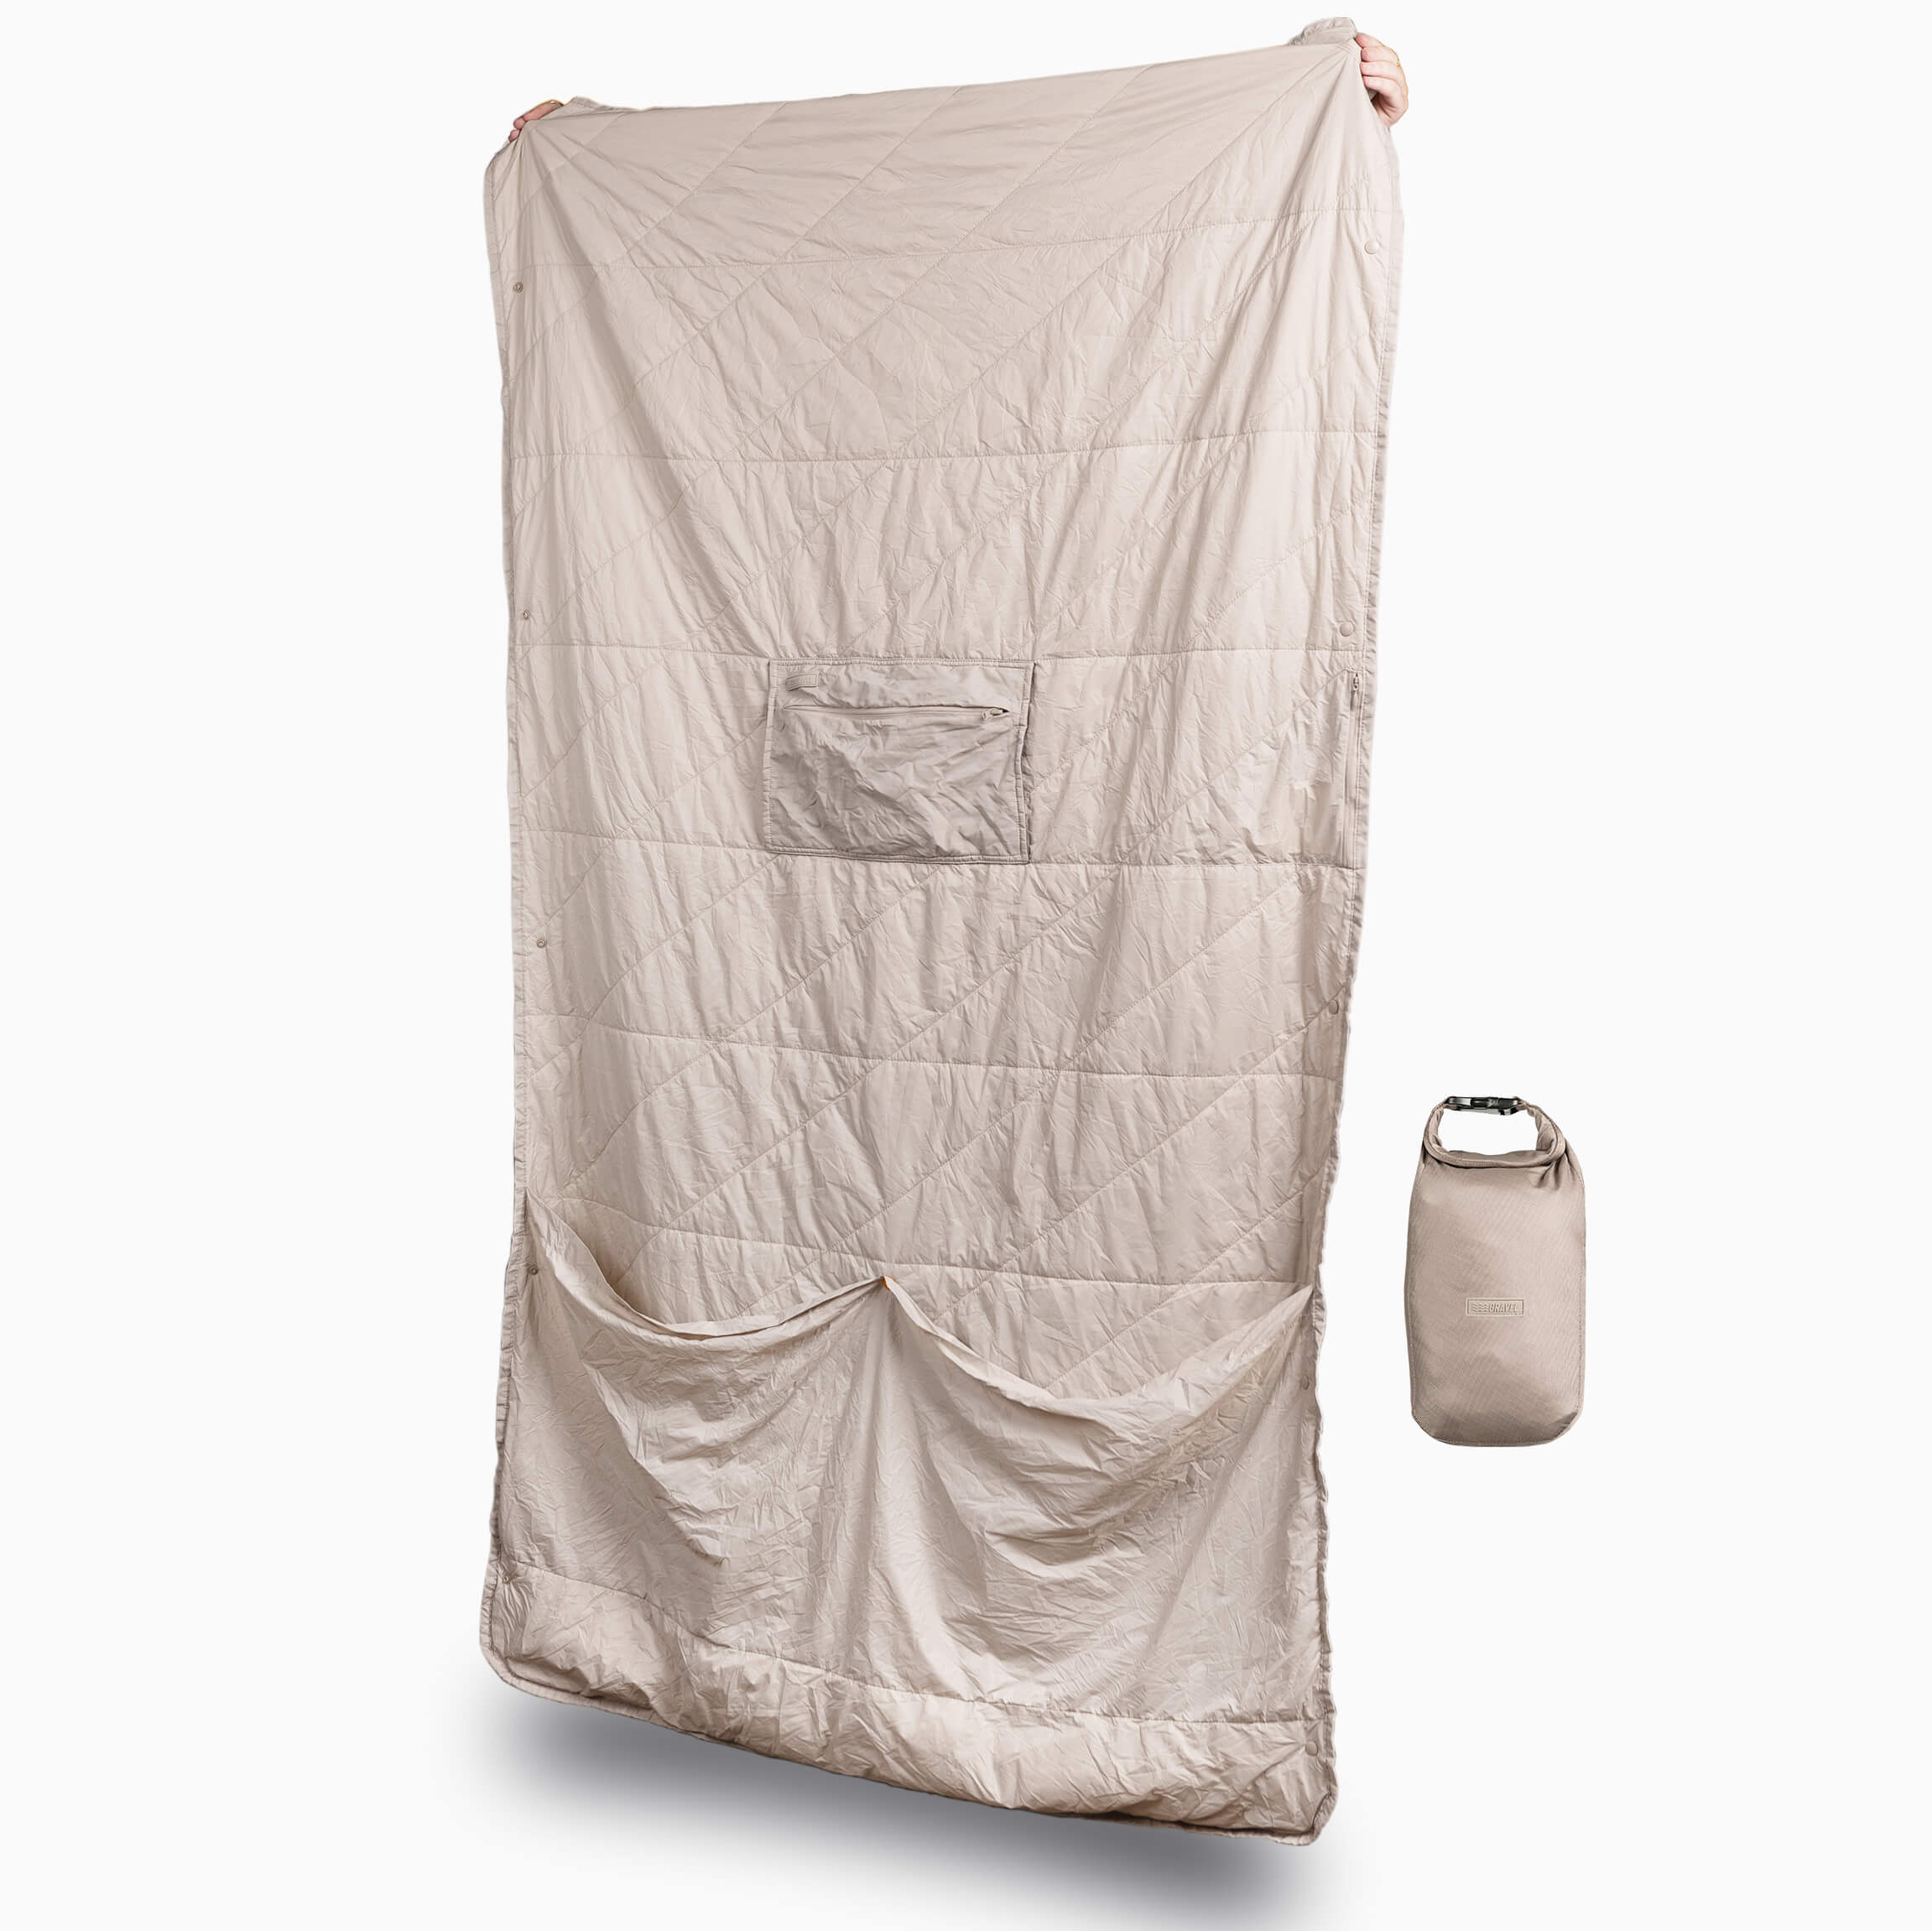 Blue Layover Travel Blanket - Packable & Insulated